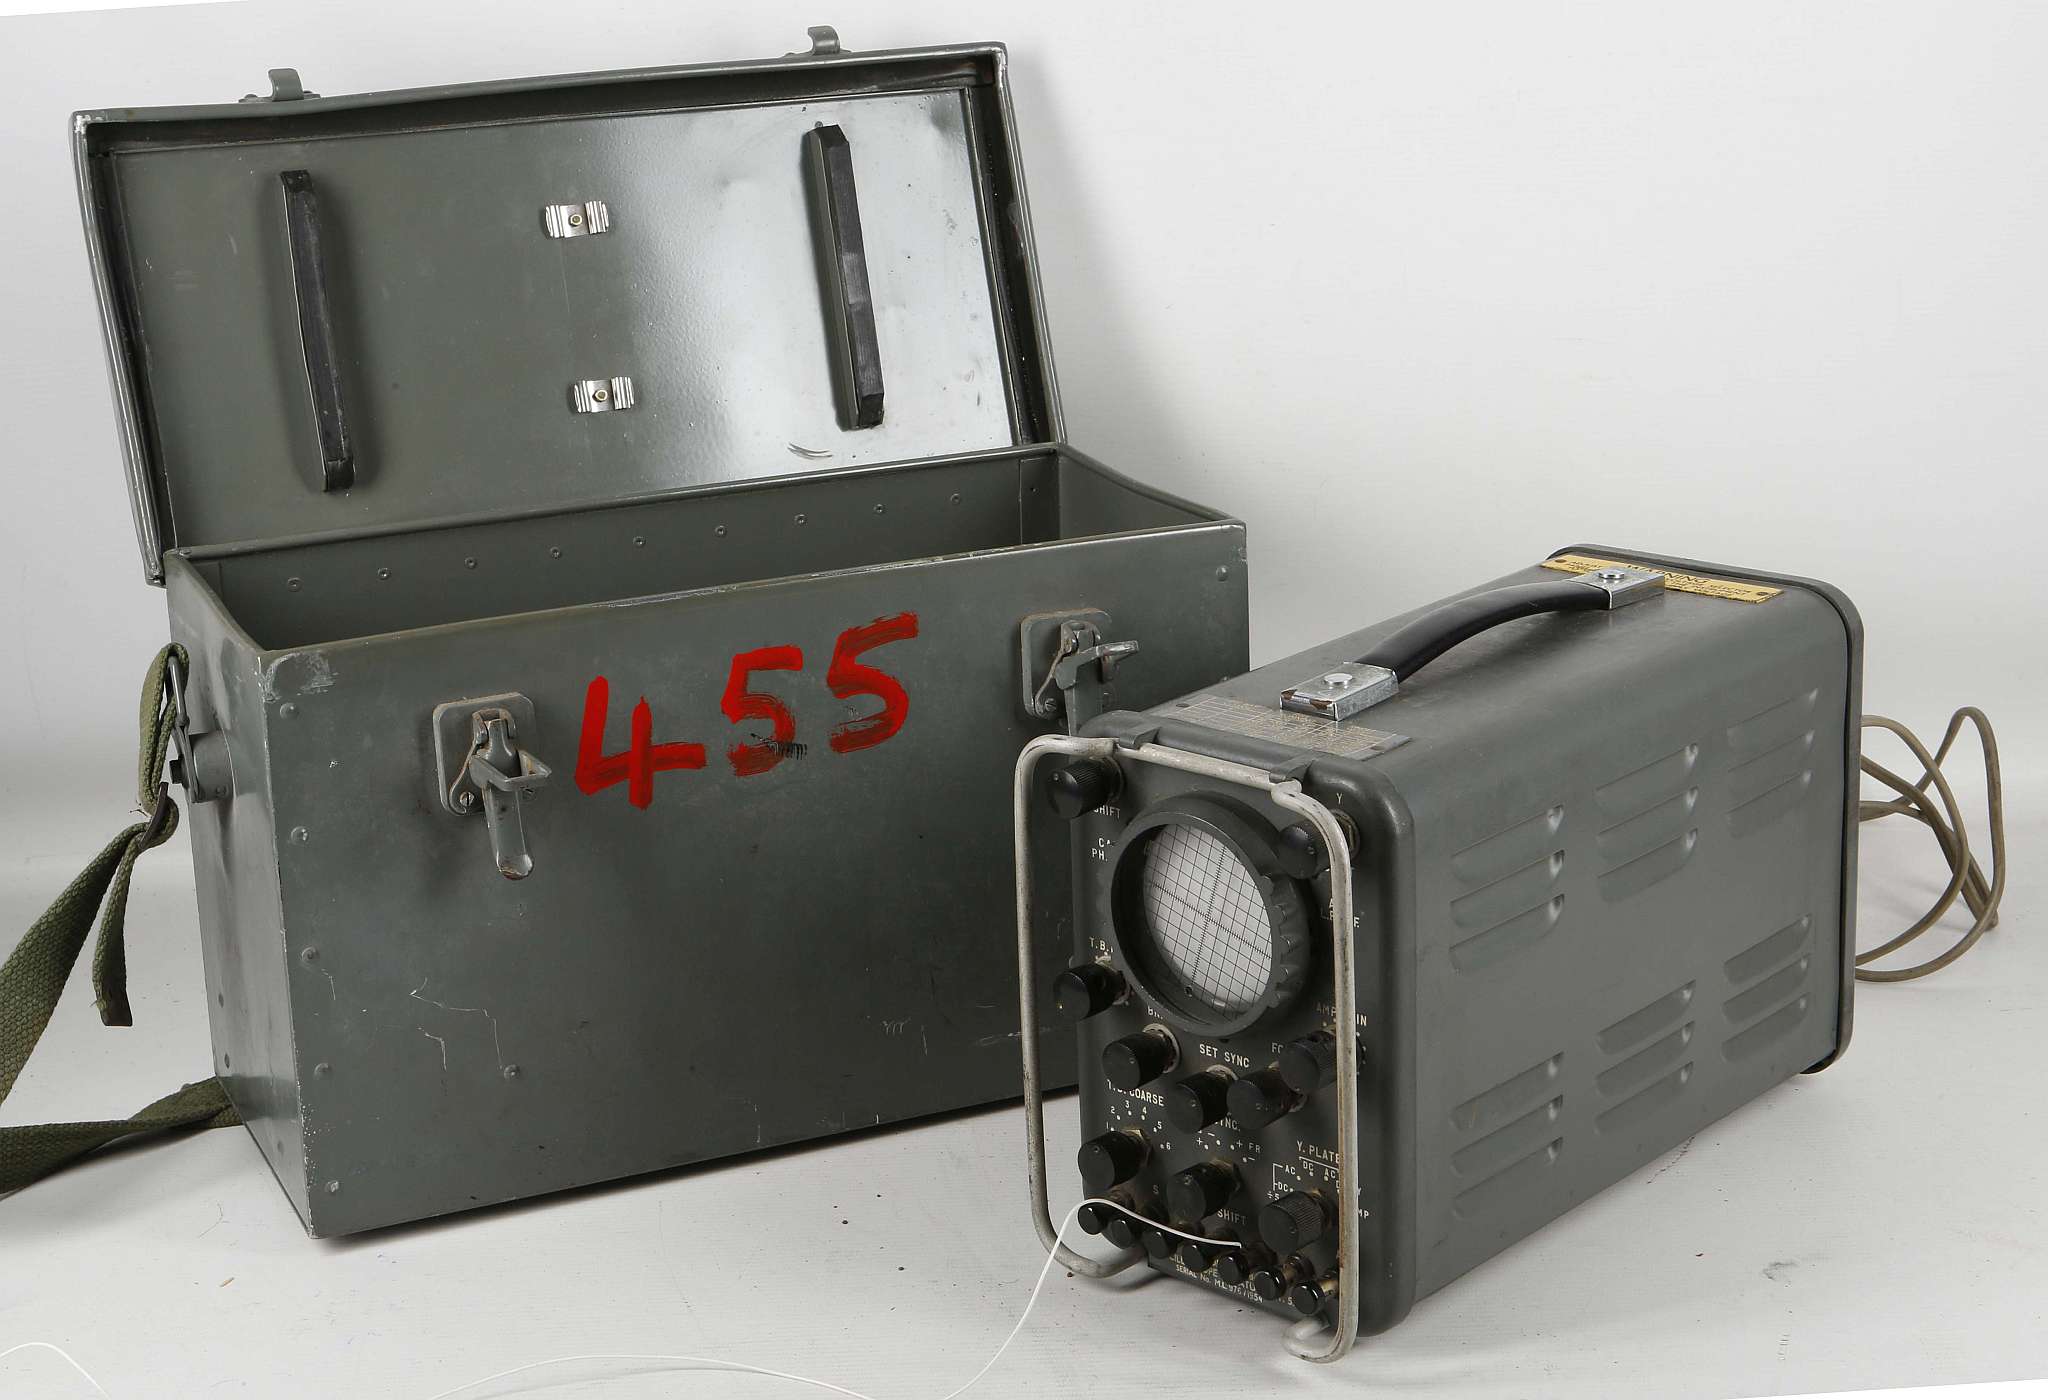 A British military oscilloscope miniature C.T.52 with carry case, c.1954.